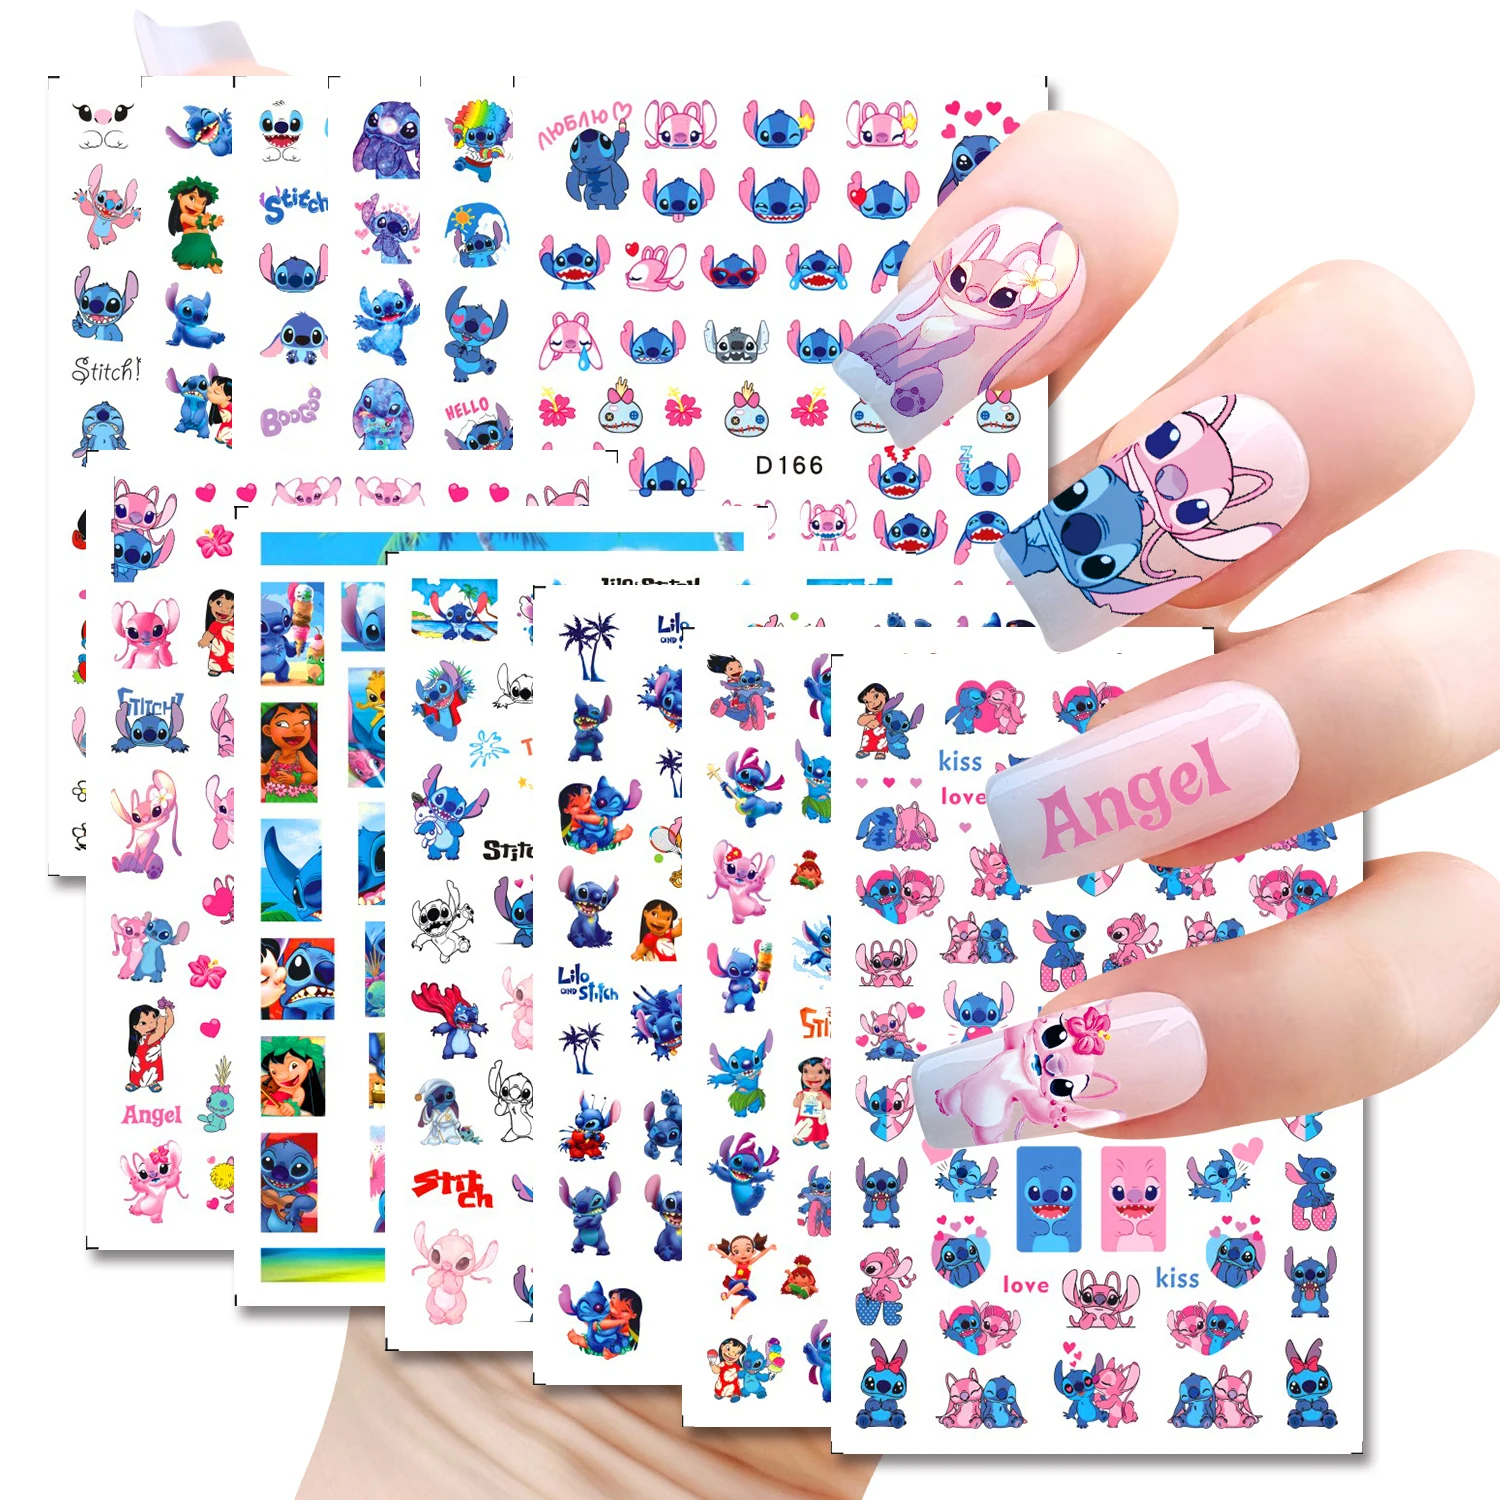 

3D Stitch Disney Nail Stickers Cartoon Animated Princess Nail Art Decorations DlY Simpsons Anime Nail Supplies Sliders For Nails